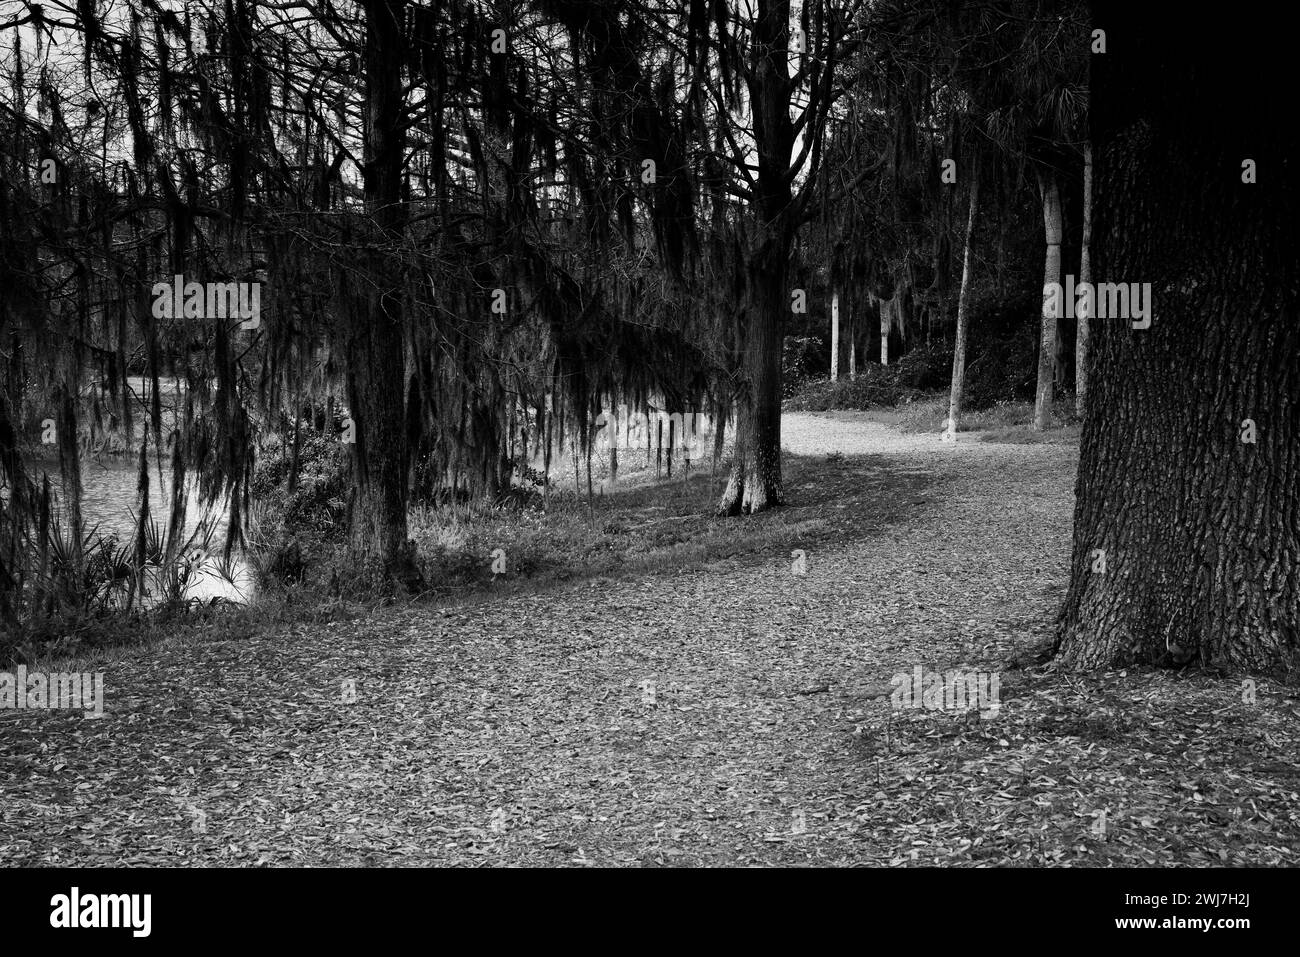 Walking Path in the Tropics, in Black and White tone, natural tropical landscape Stock Photo